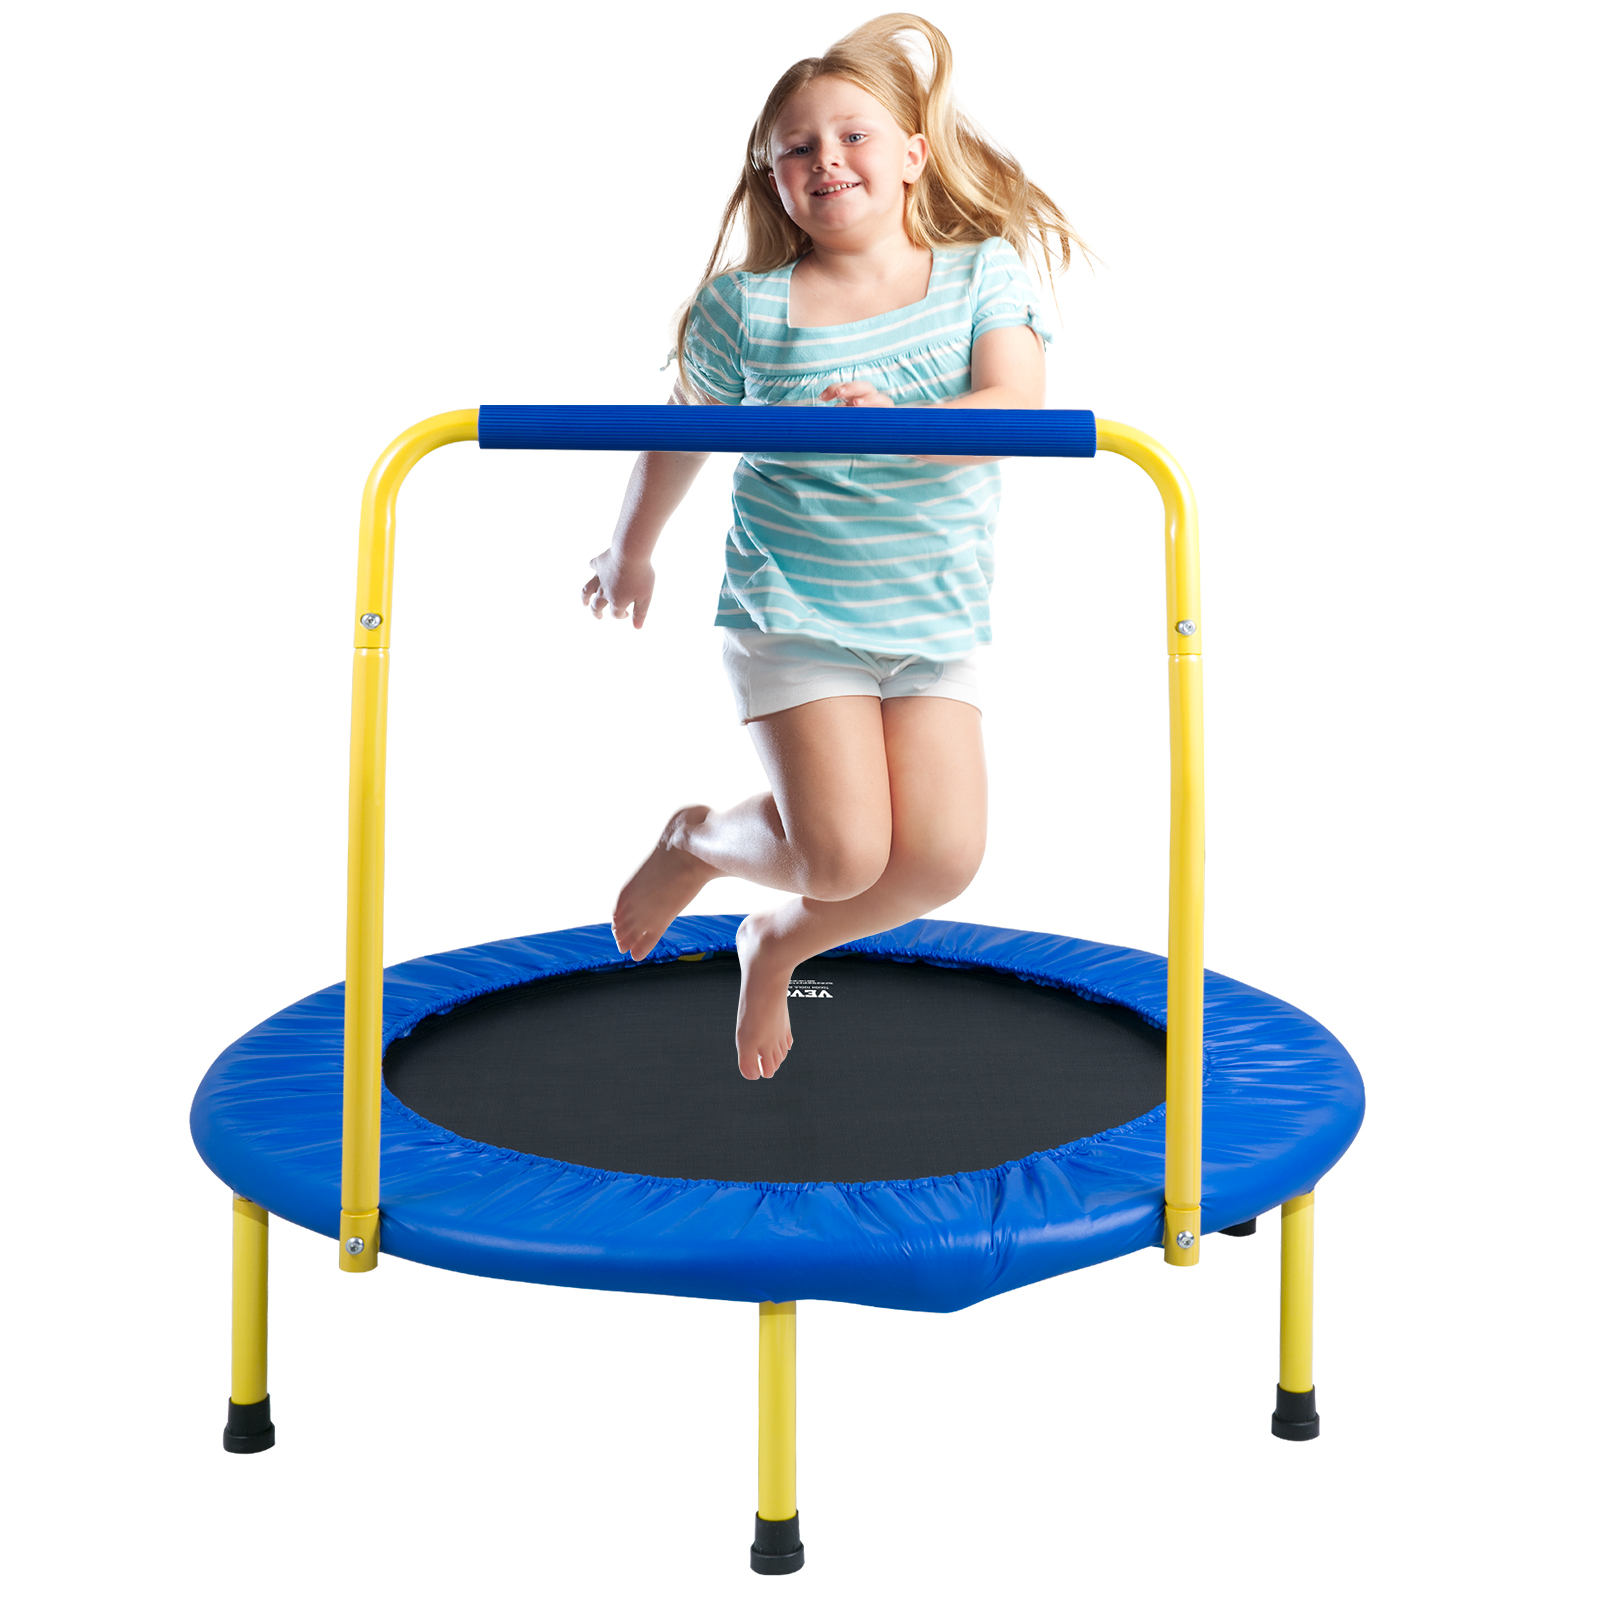 Trampoline for Kids, 5FT,with Safety Enclosure Net